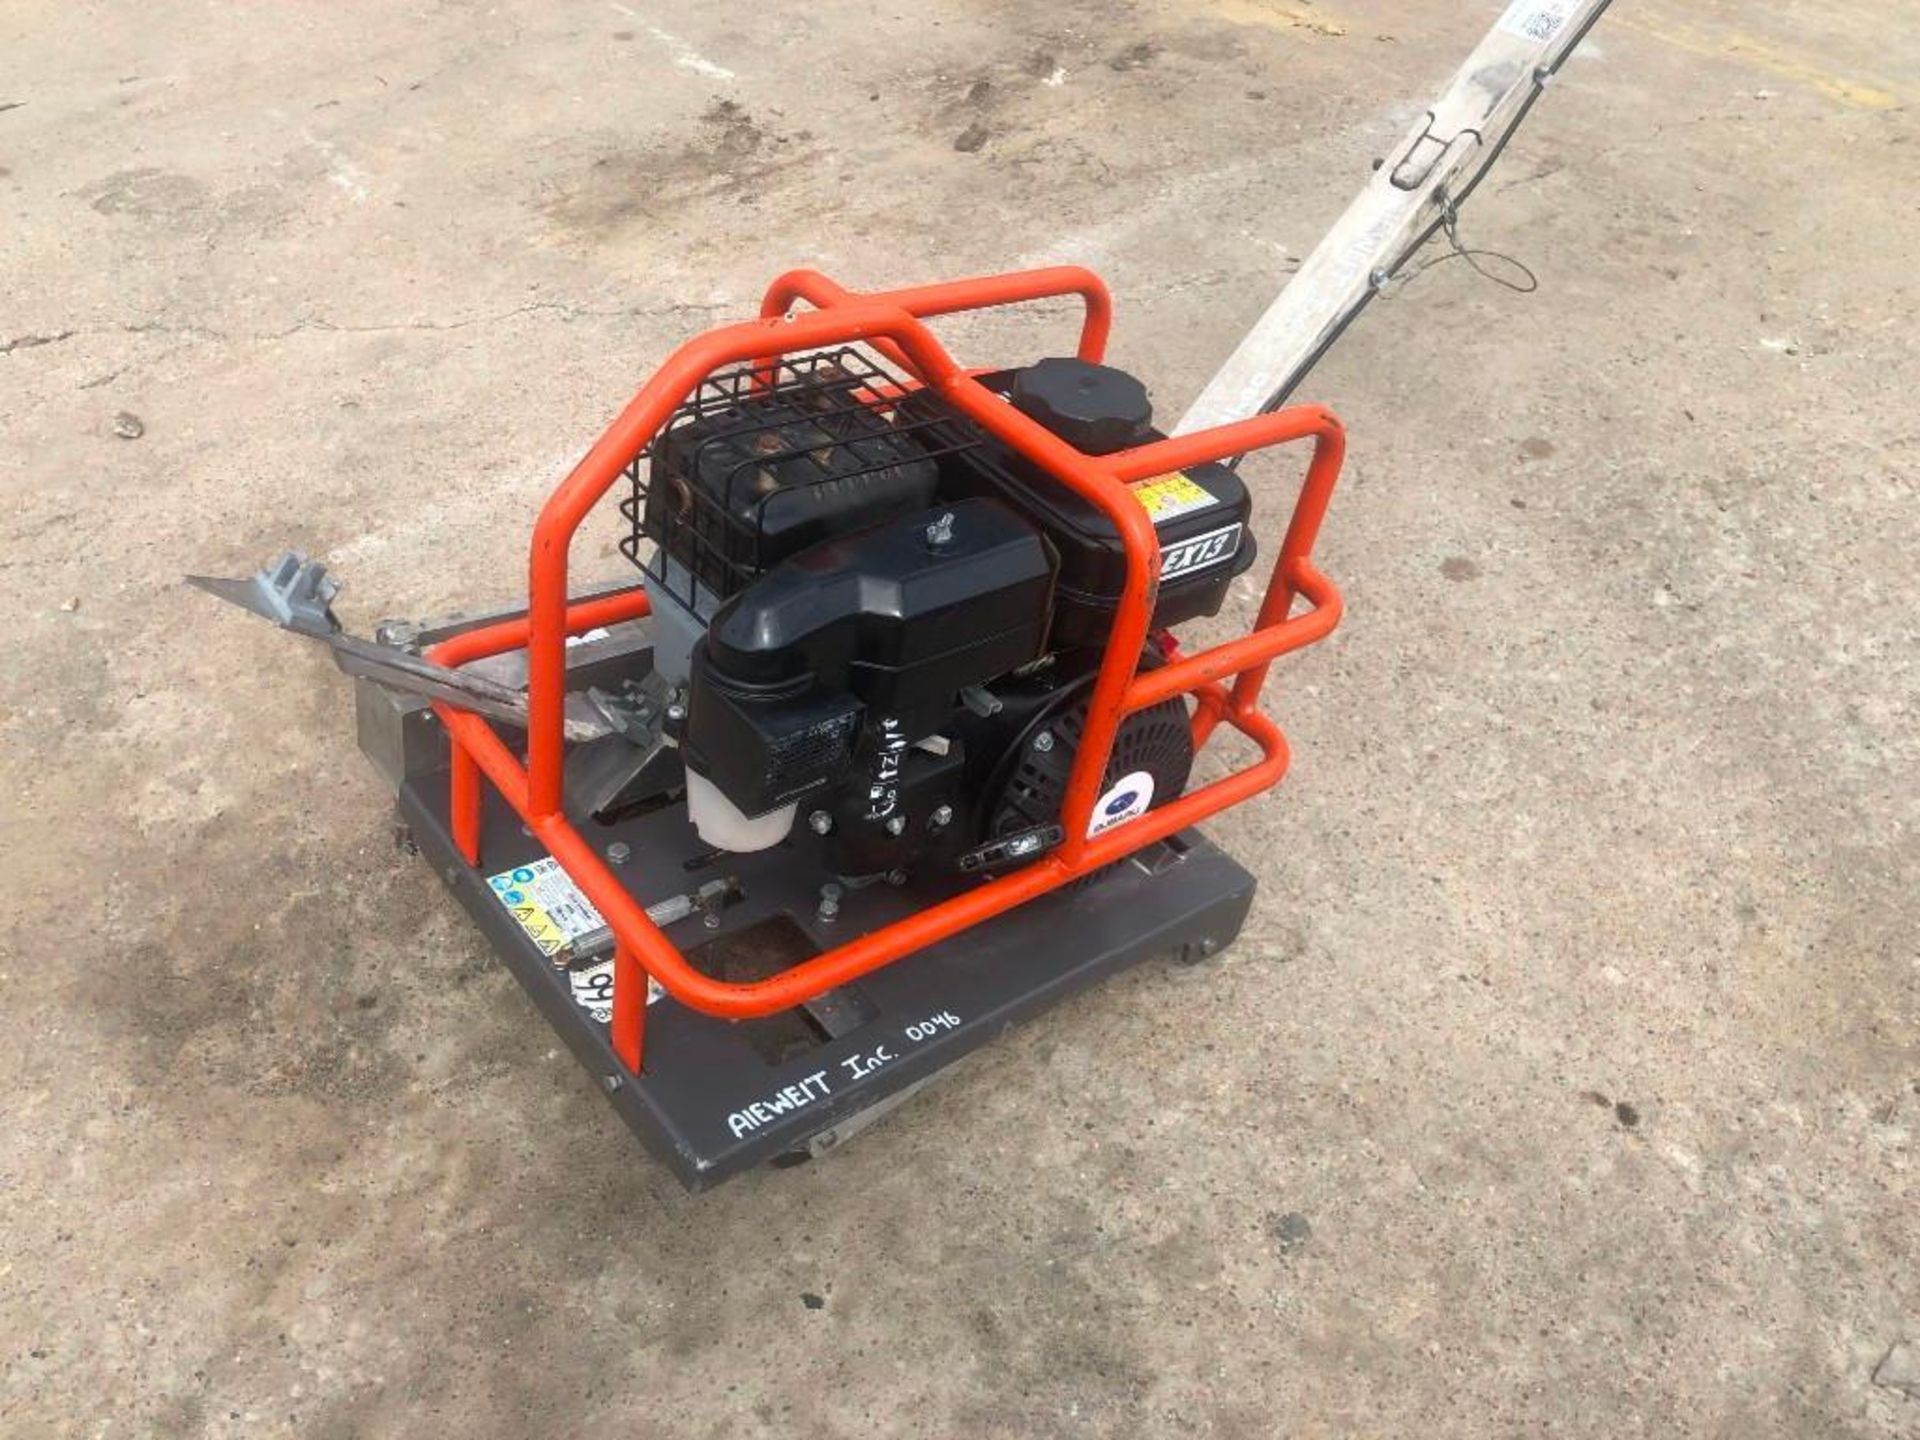 Husqvarna Soff-Cut 150 Concrete Saw, Serial #20180300046, Model Soff-Cut 150. Located at 301 E Henry - Image 2 of 5